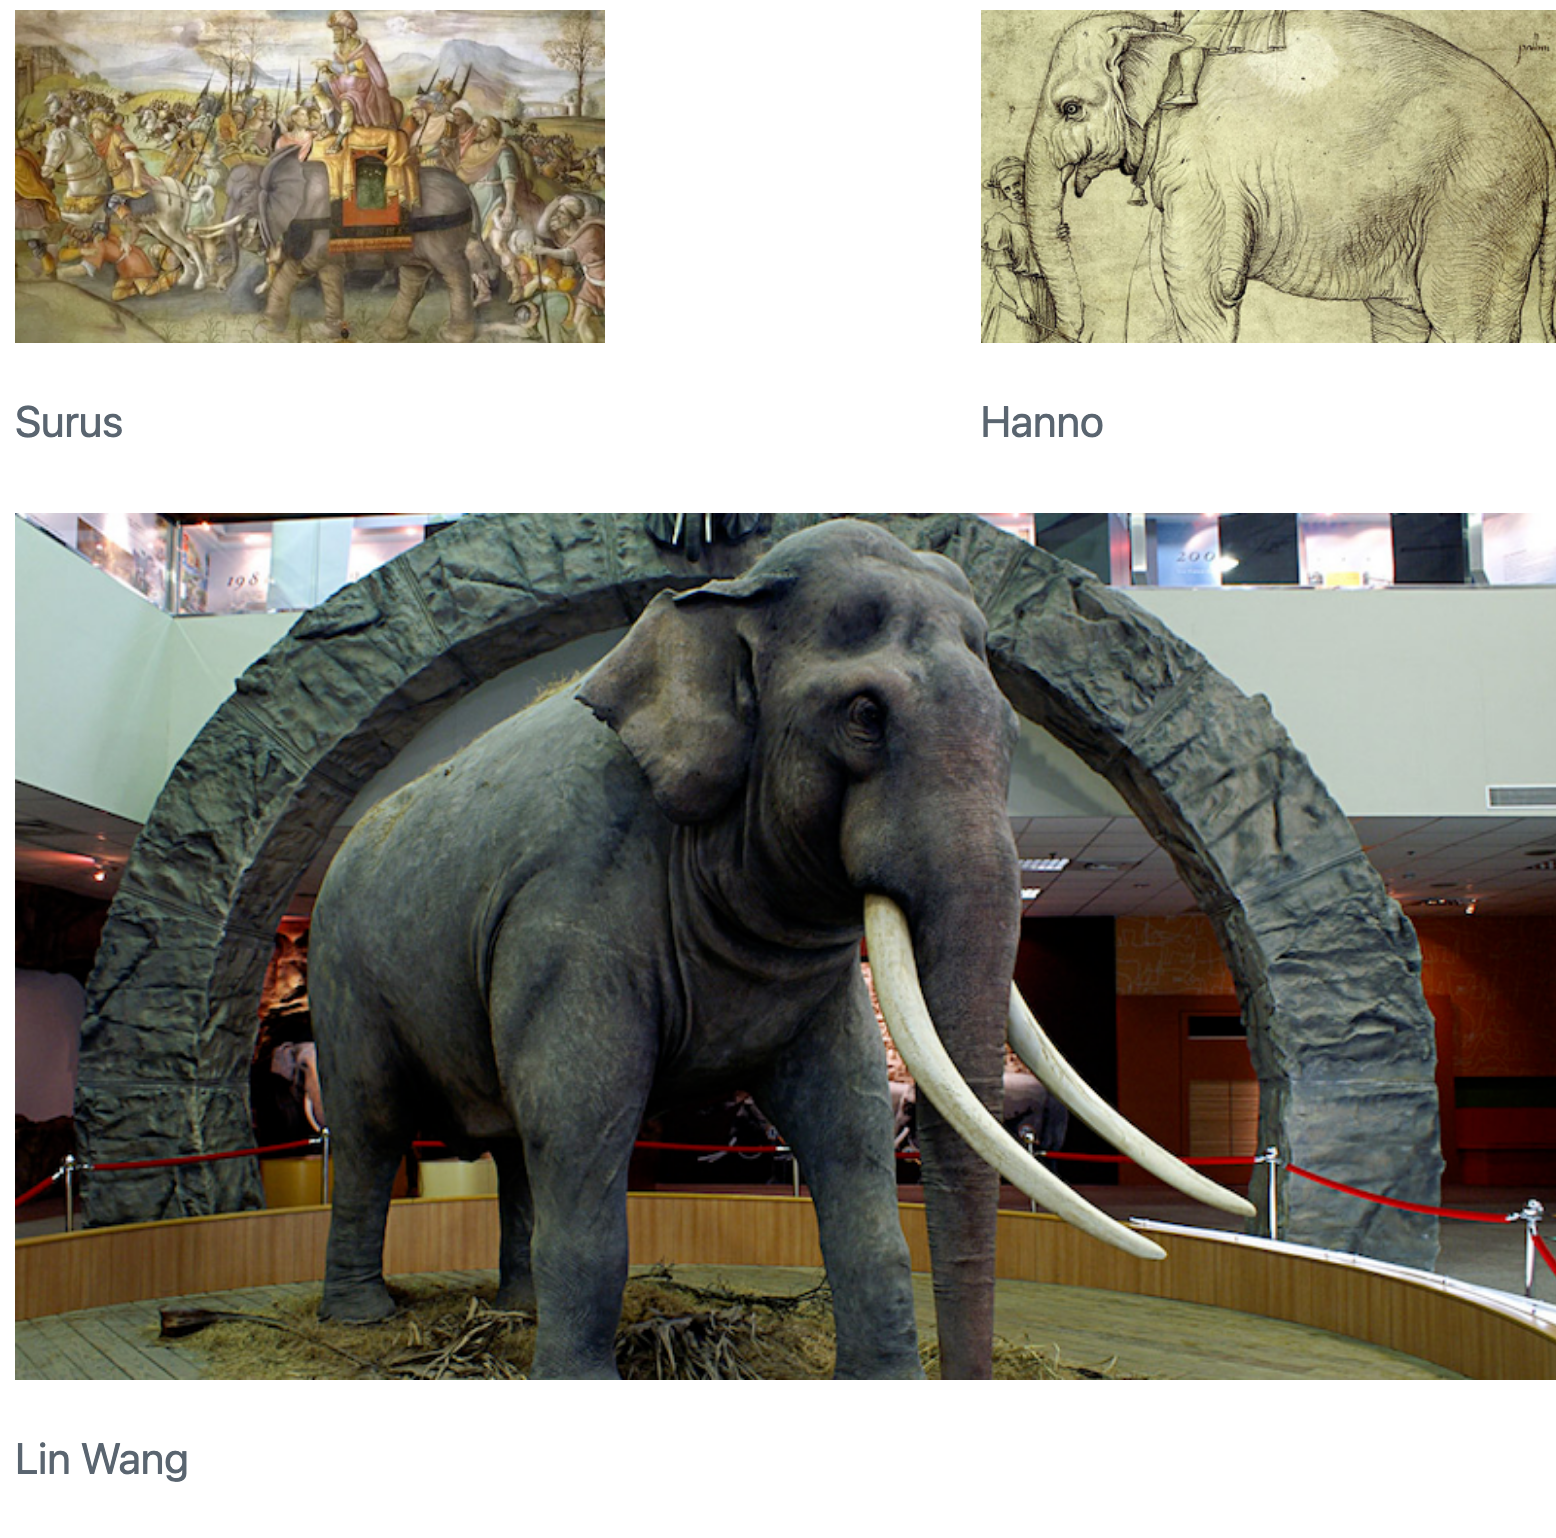 Three elephant pictures arranged such that two pictures are side-by-side in the first row, and the third picture is underneath both of these. The picture on the left in the first row is captioned 'Surus' and the picture on the right is captioned 'Hanno'. The two pictures are separated by some whitespace. The picture underneath these two is captioned 'Lin Wang' and is wider and taller than the other two put together.